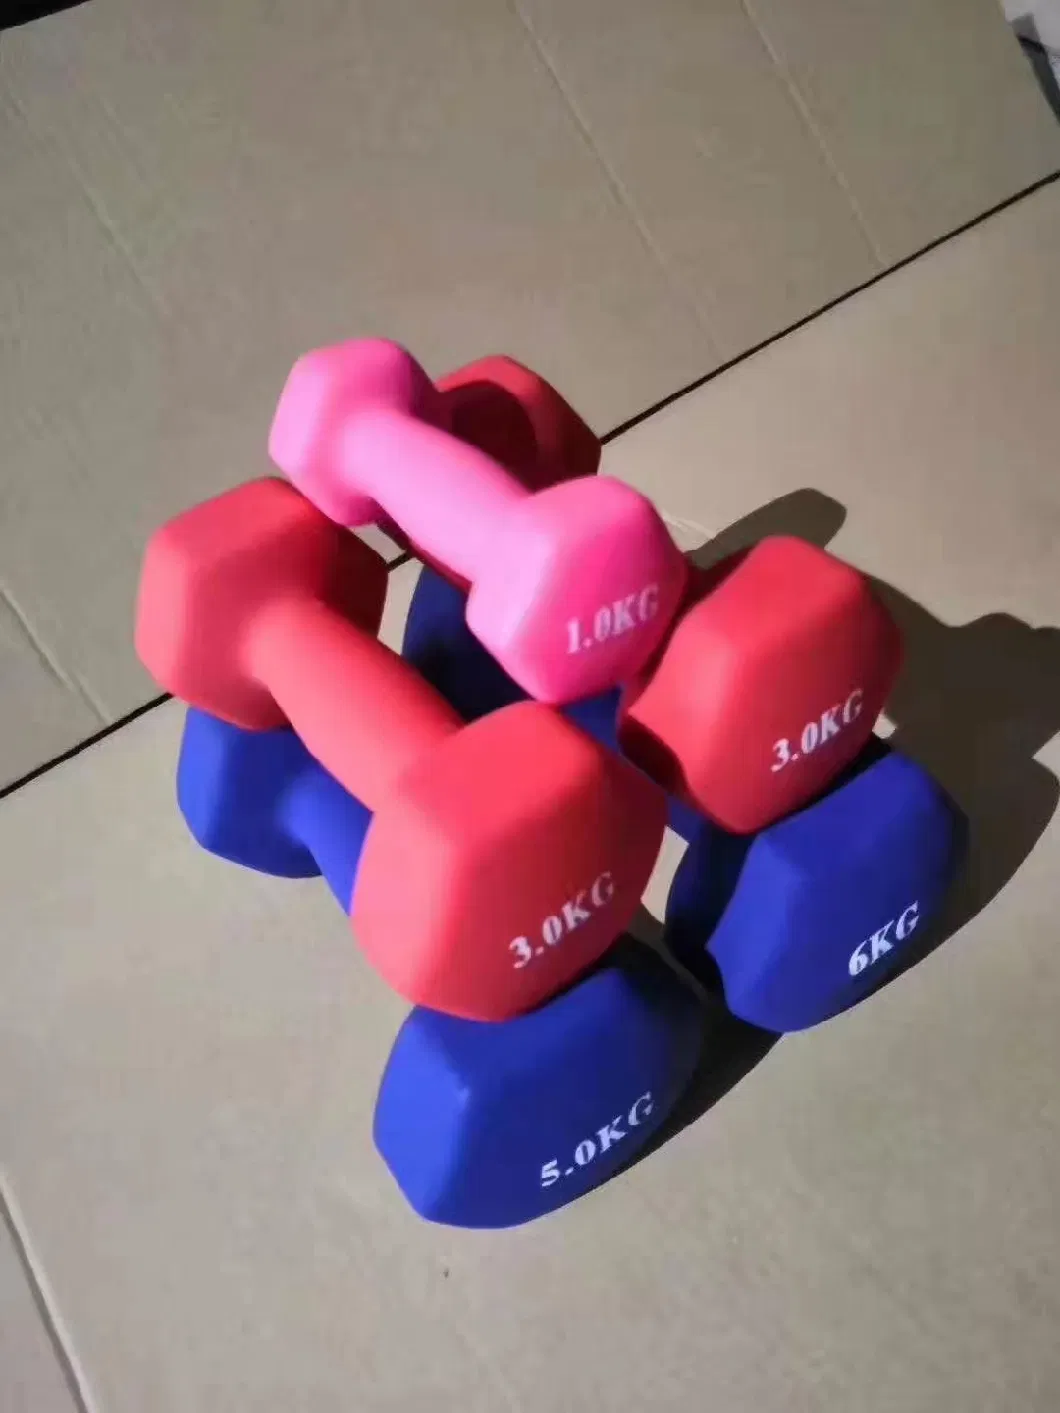 Hot Selling Soft Neoprene Hex Dumbbell Hand Weight Set for Home Gym